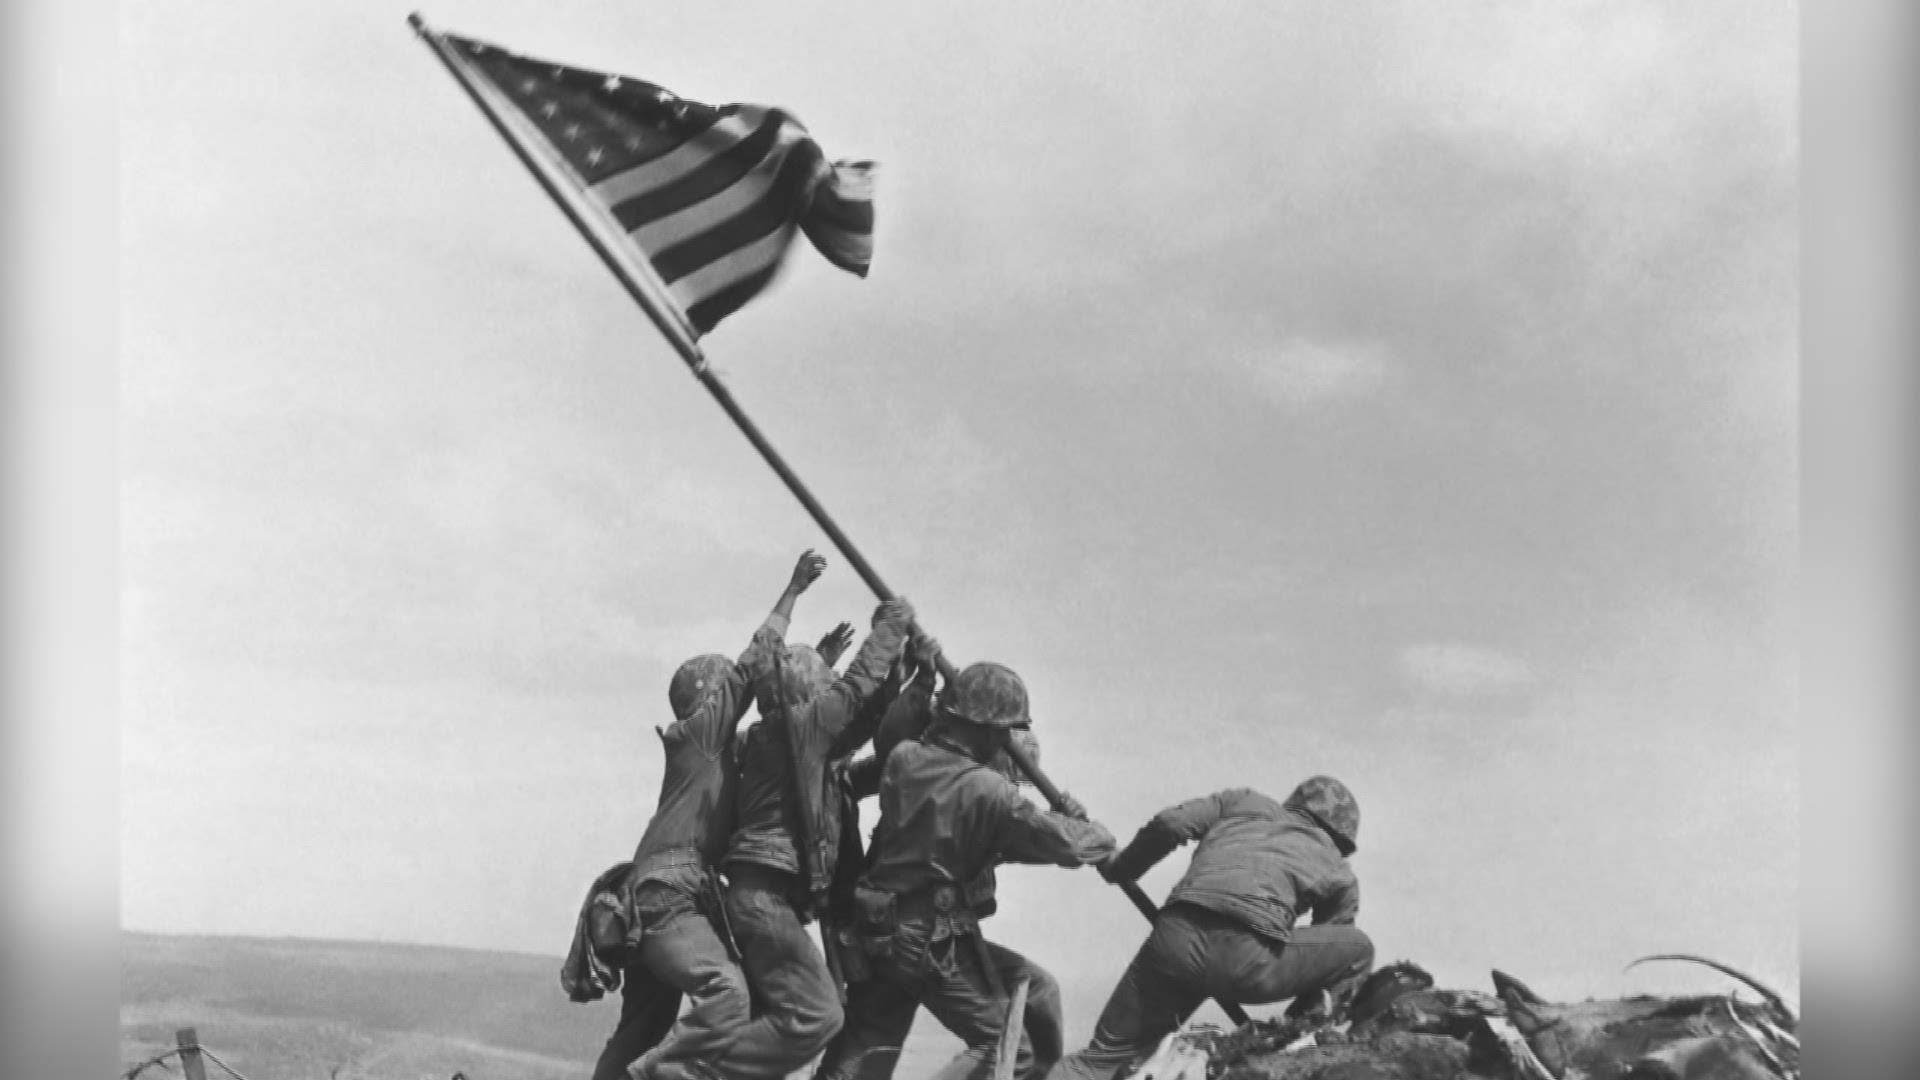 Event held at Veterans Memorial High School remembered the Battle of Iwo Jima during War World II when the U.S. captured the island from the Japanese.